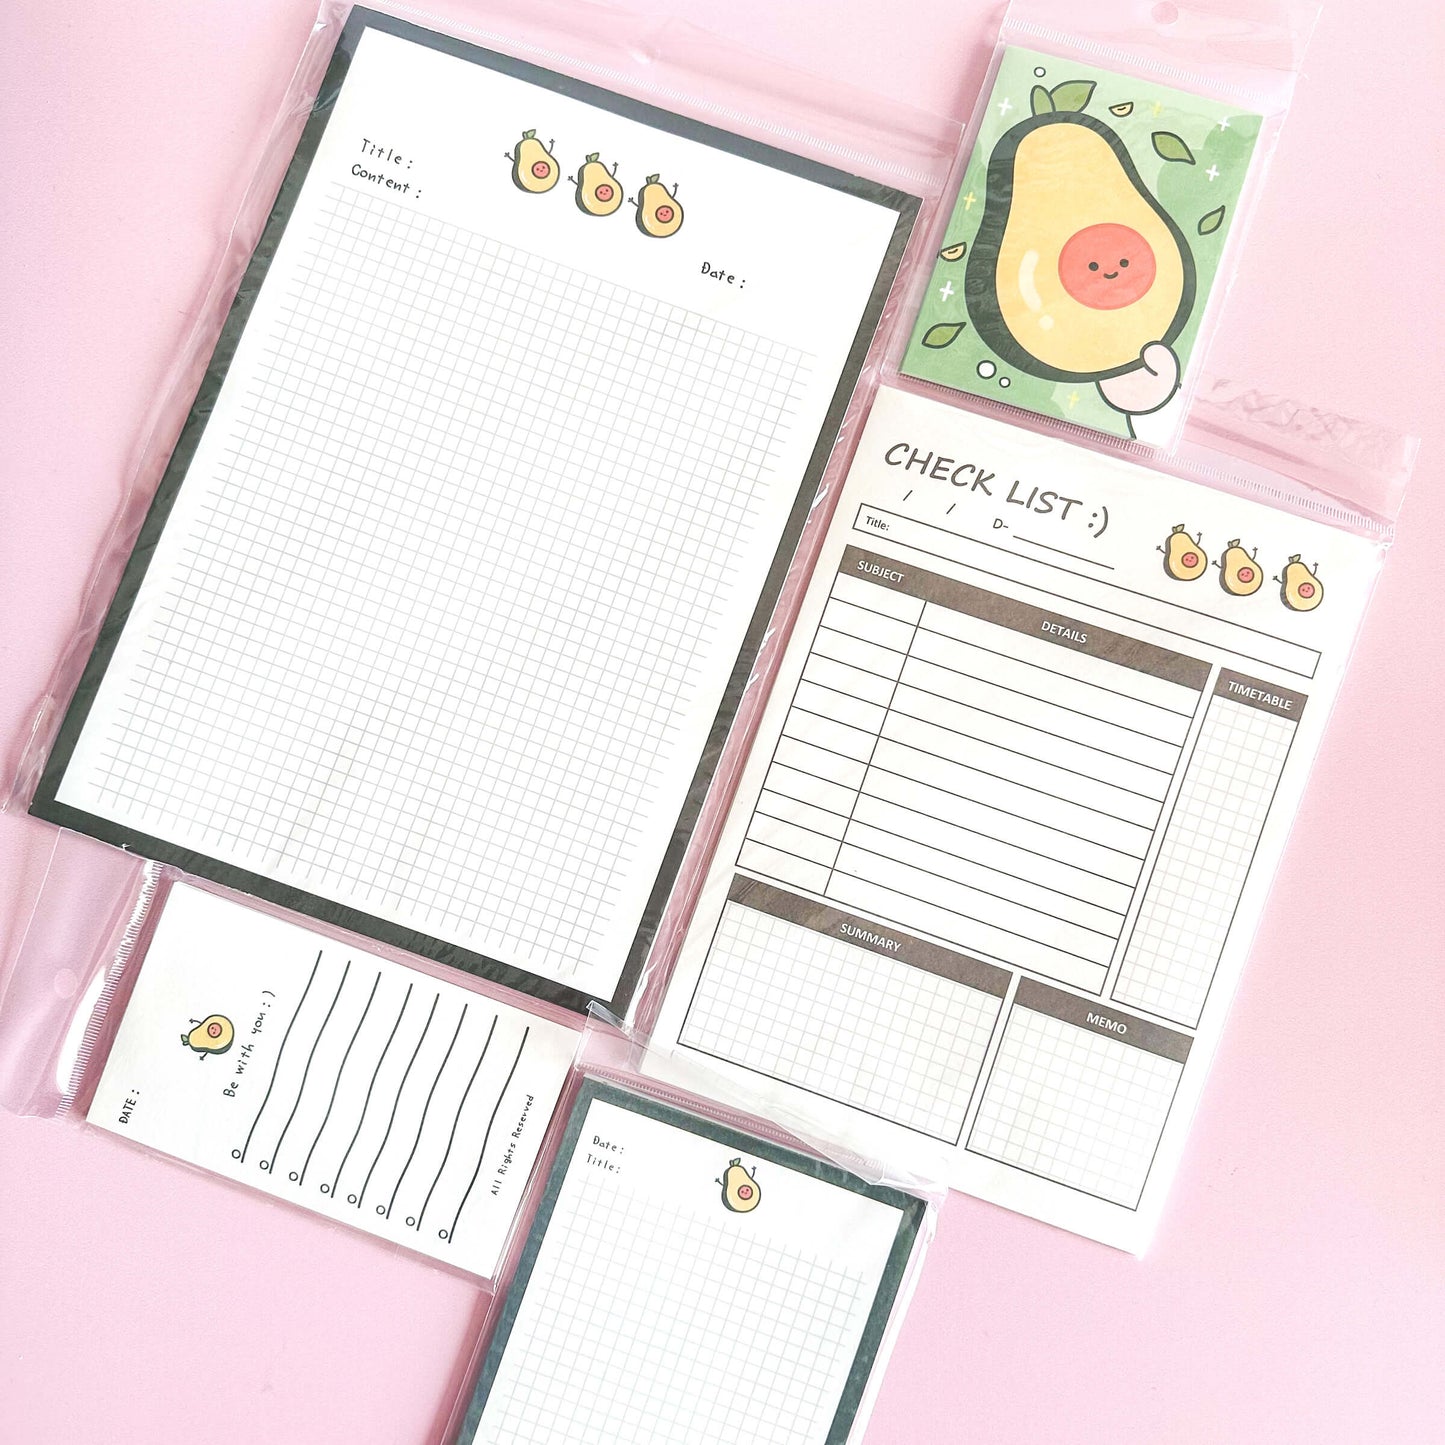 Avo themed notepad set includes: 1 Grid notepad: 176mm x250mm 1 Checklist notepad with subject and timetable: 144x206mm 1 Grid Date & title notepad: 100x 130mm 1 Checklist notepad: 70X 120MM 1 Avo notepad: 76 x 100mm